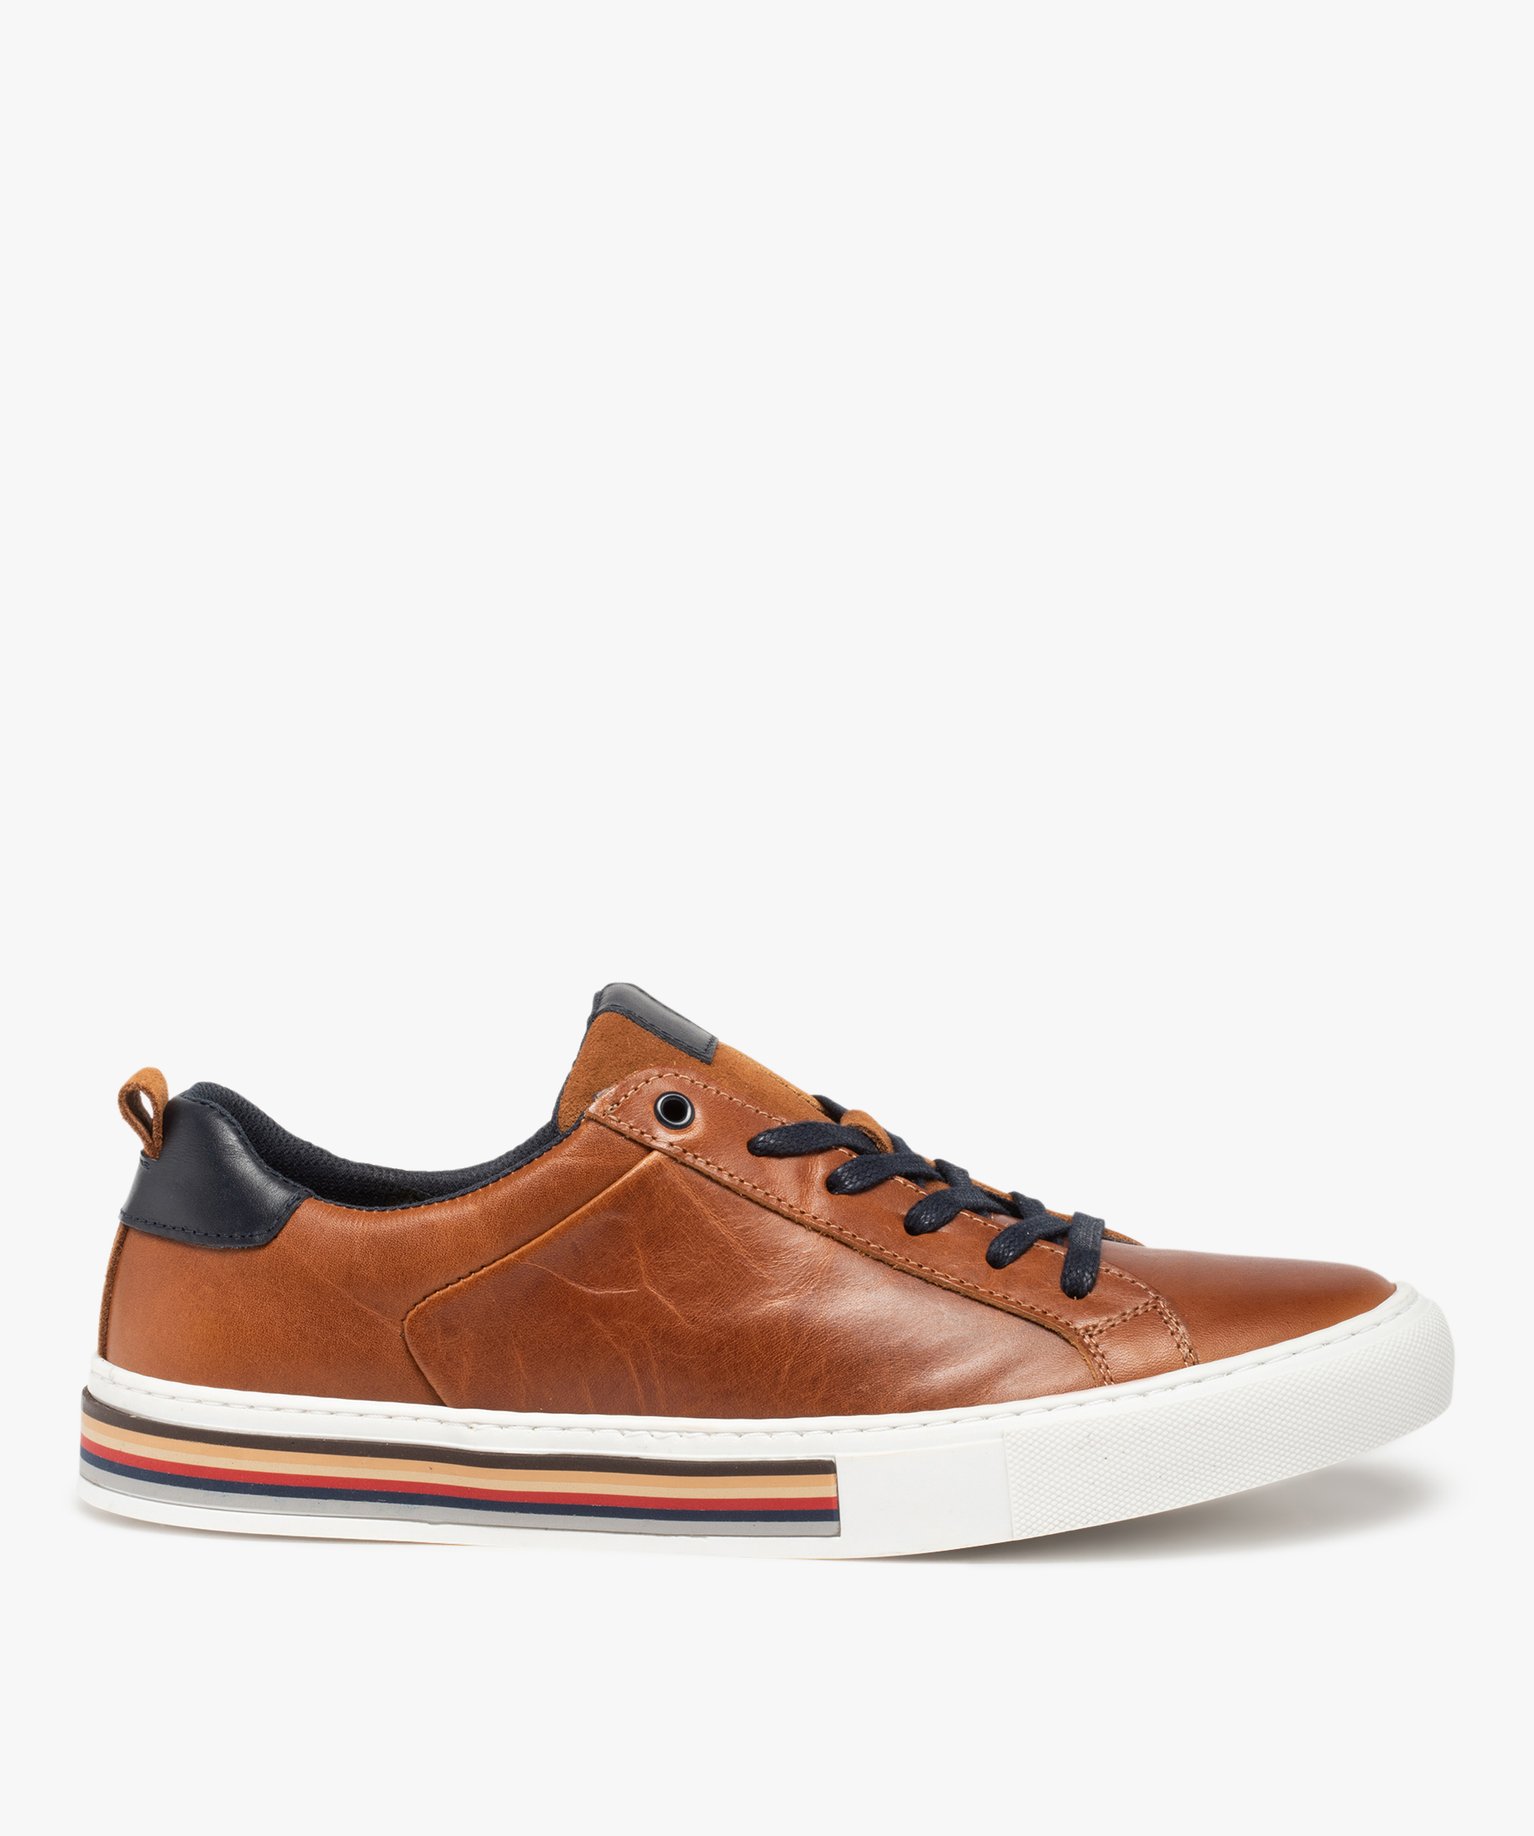 baskets homme dessus cuir a lacets - taneo orange